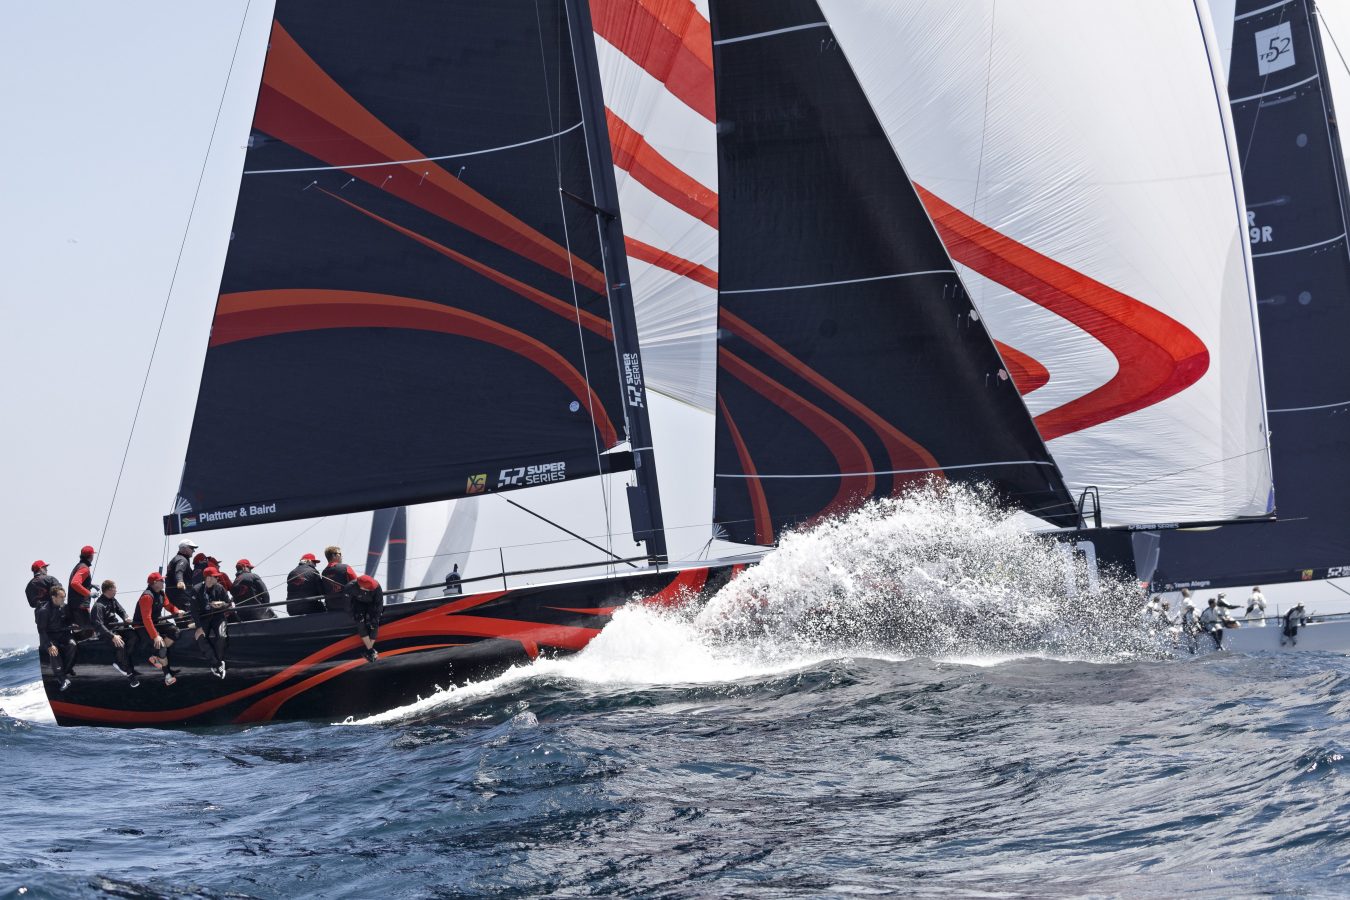 SAILS, SUPPORT AND THE 52 SUPER SERIES